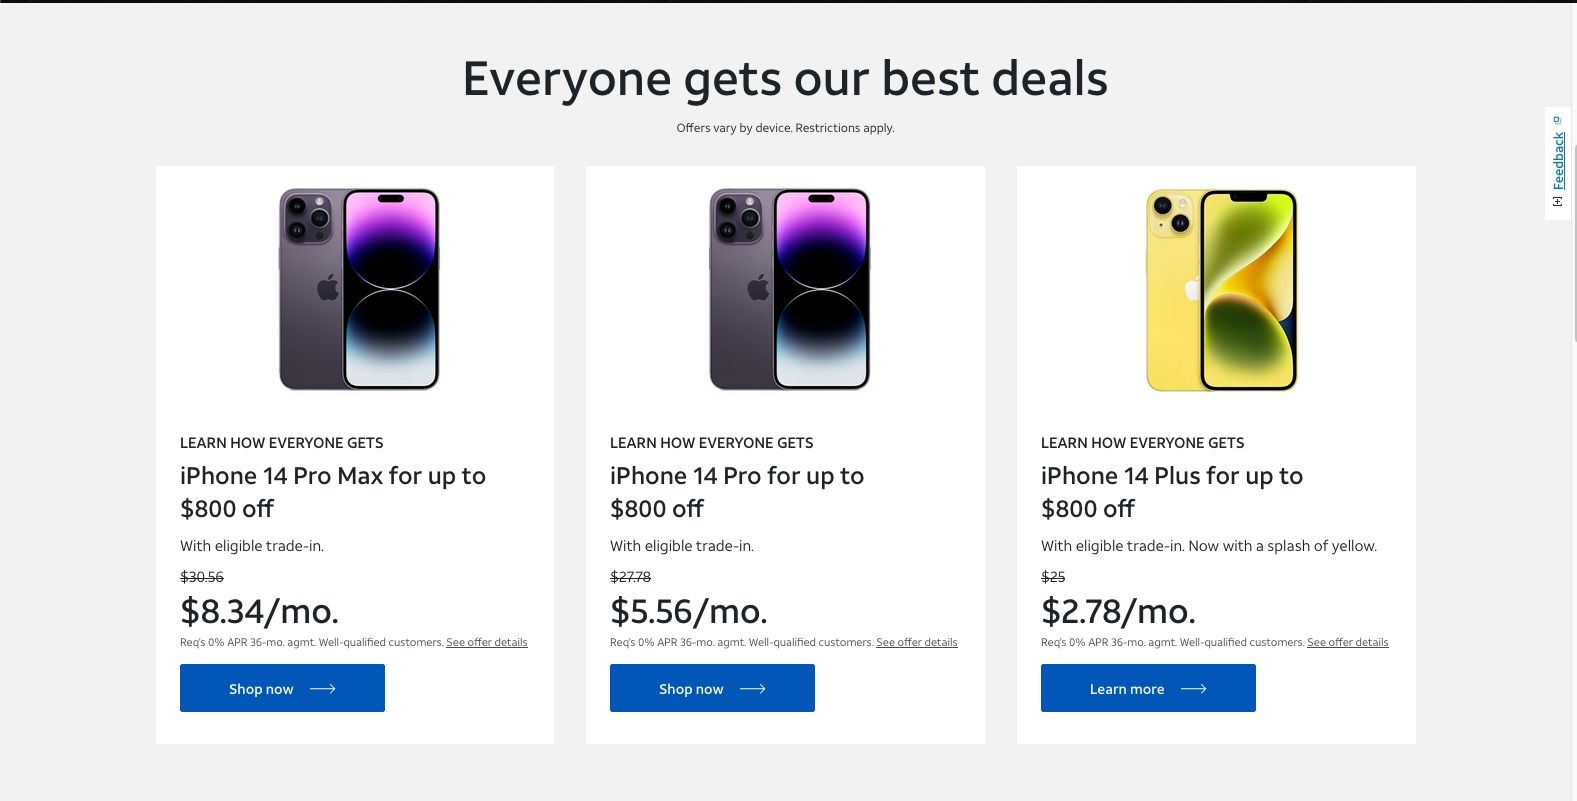 iPhone trade-in deals on AT&T